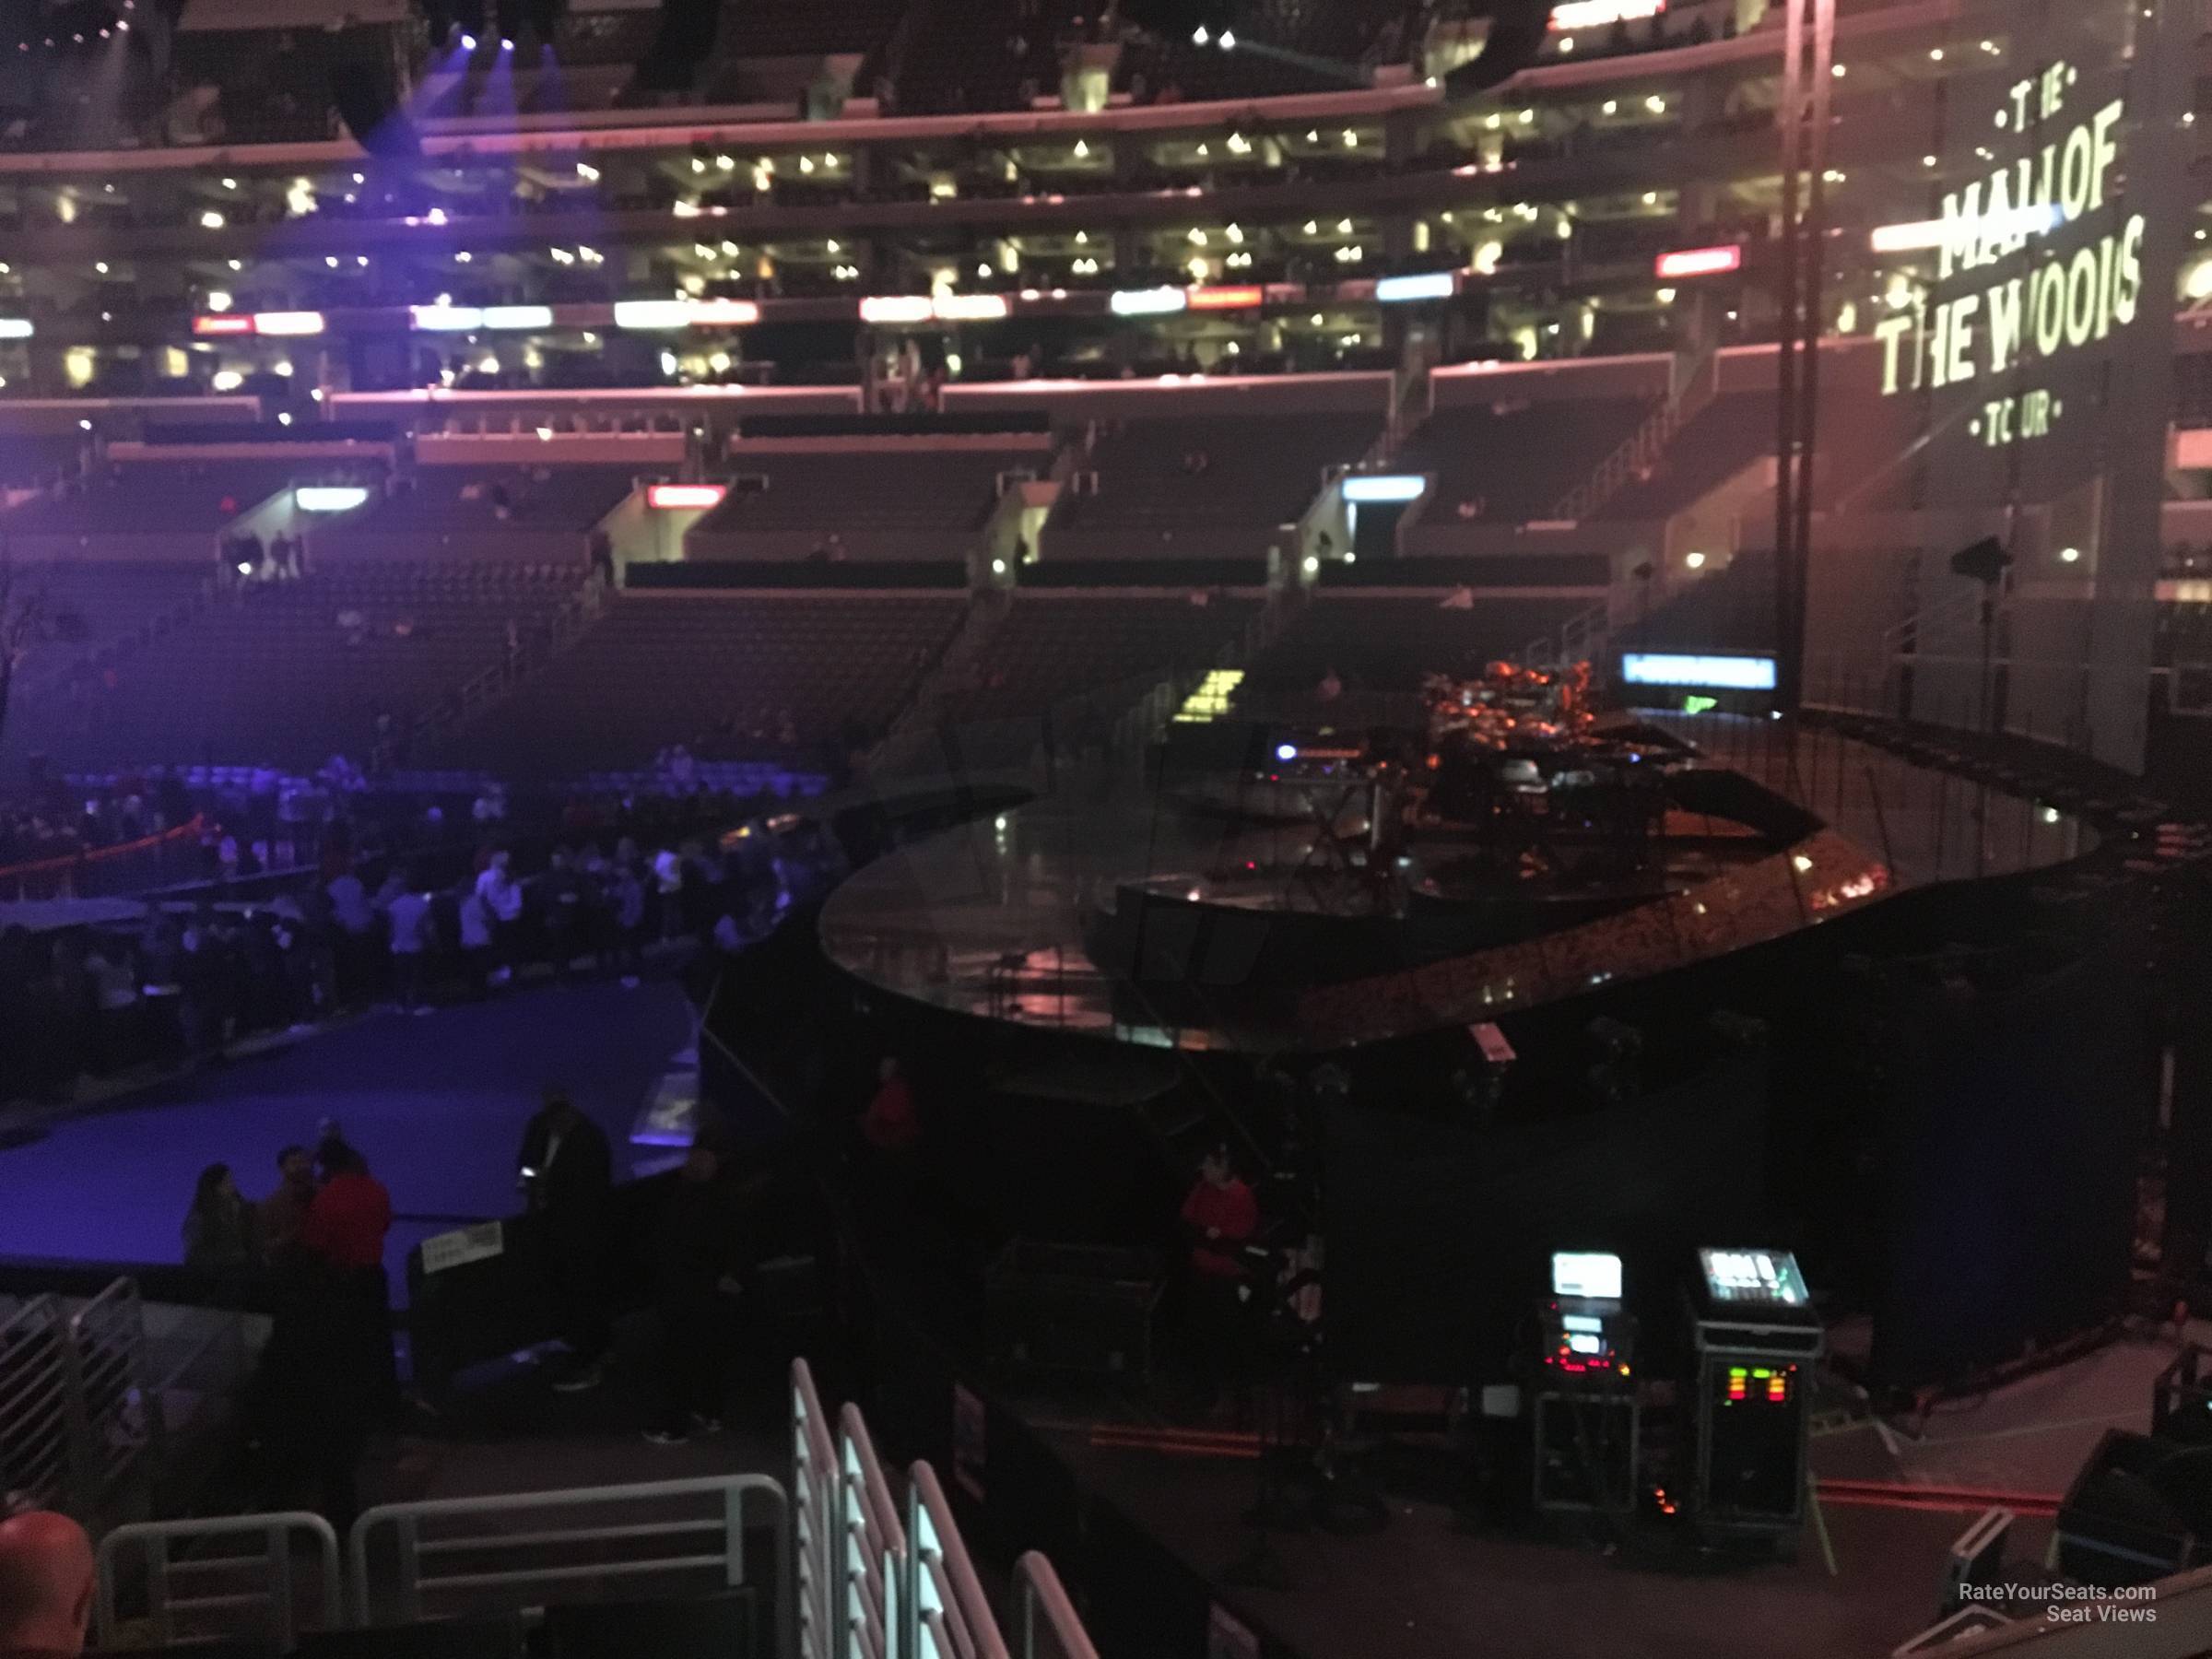 section 117, row 15 seat view  for concert - crypto.com arena